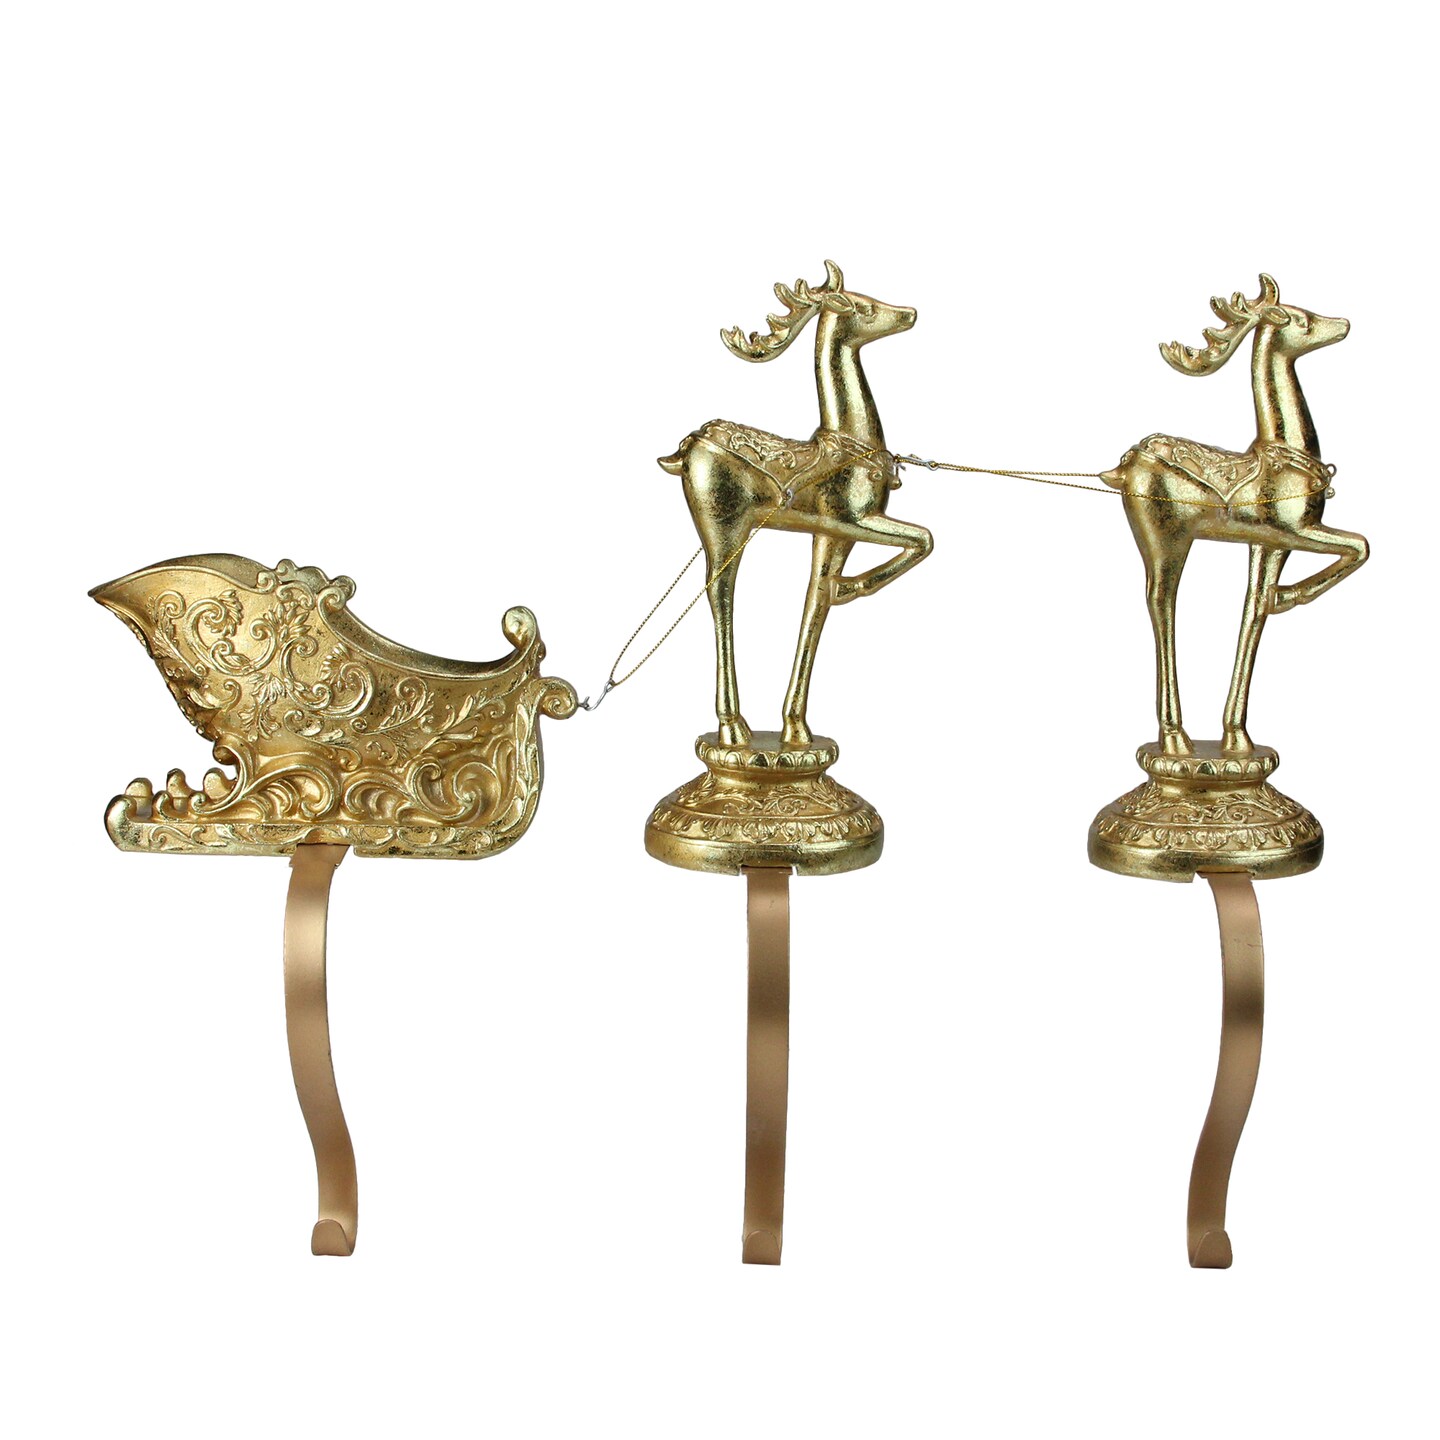 Roman 3-Piece Gold Weathered Reindeer and Sleigh Christmas Stocking Holder